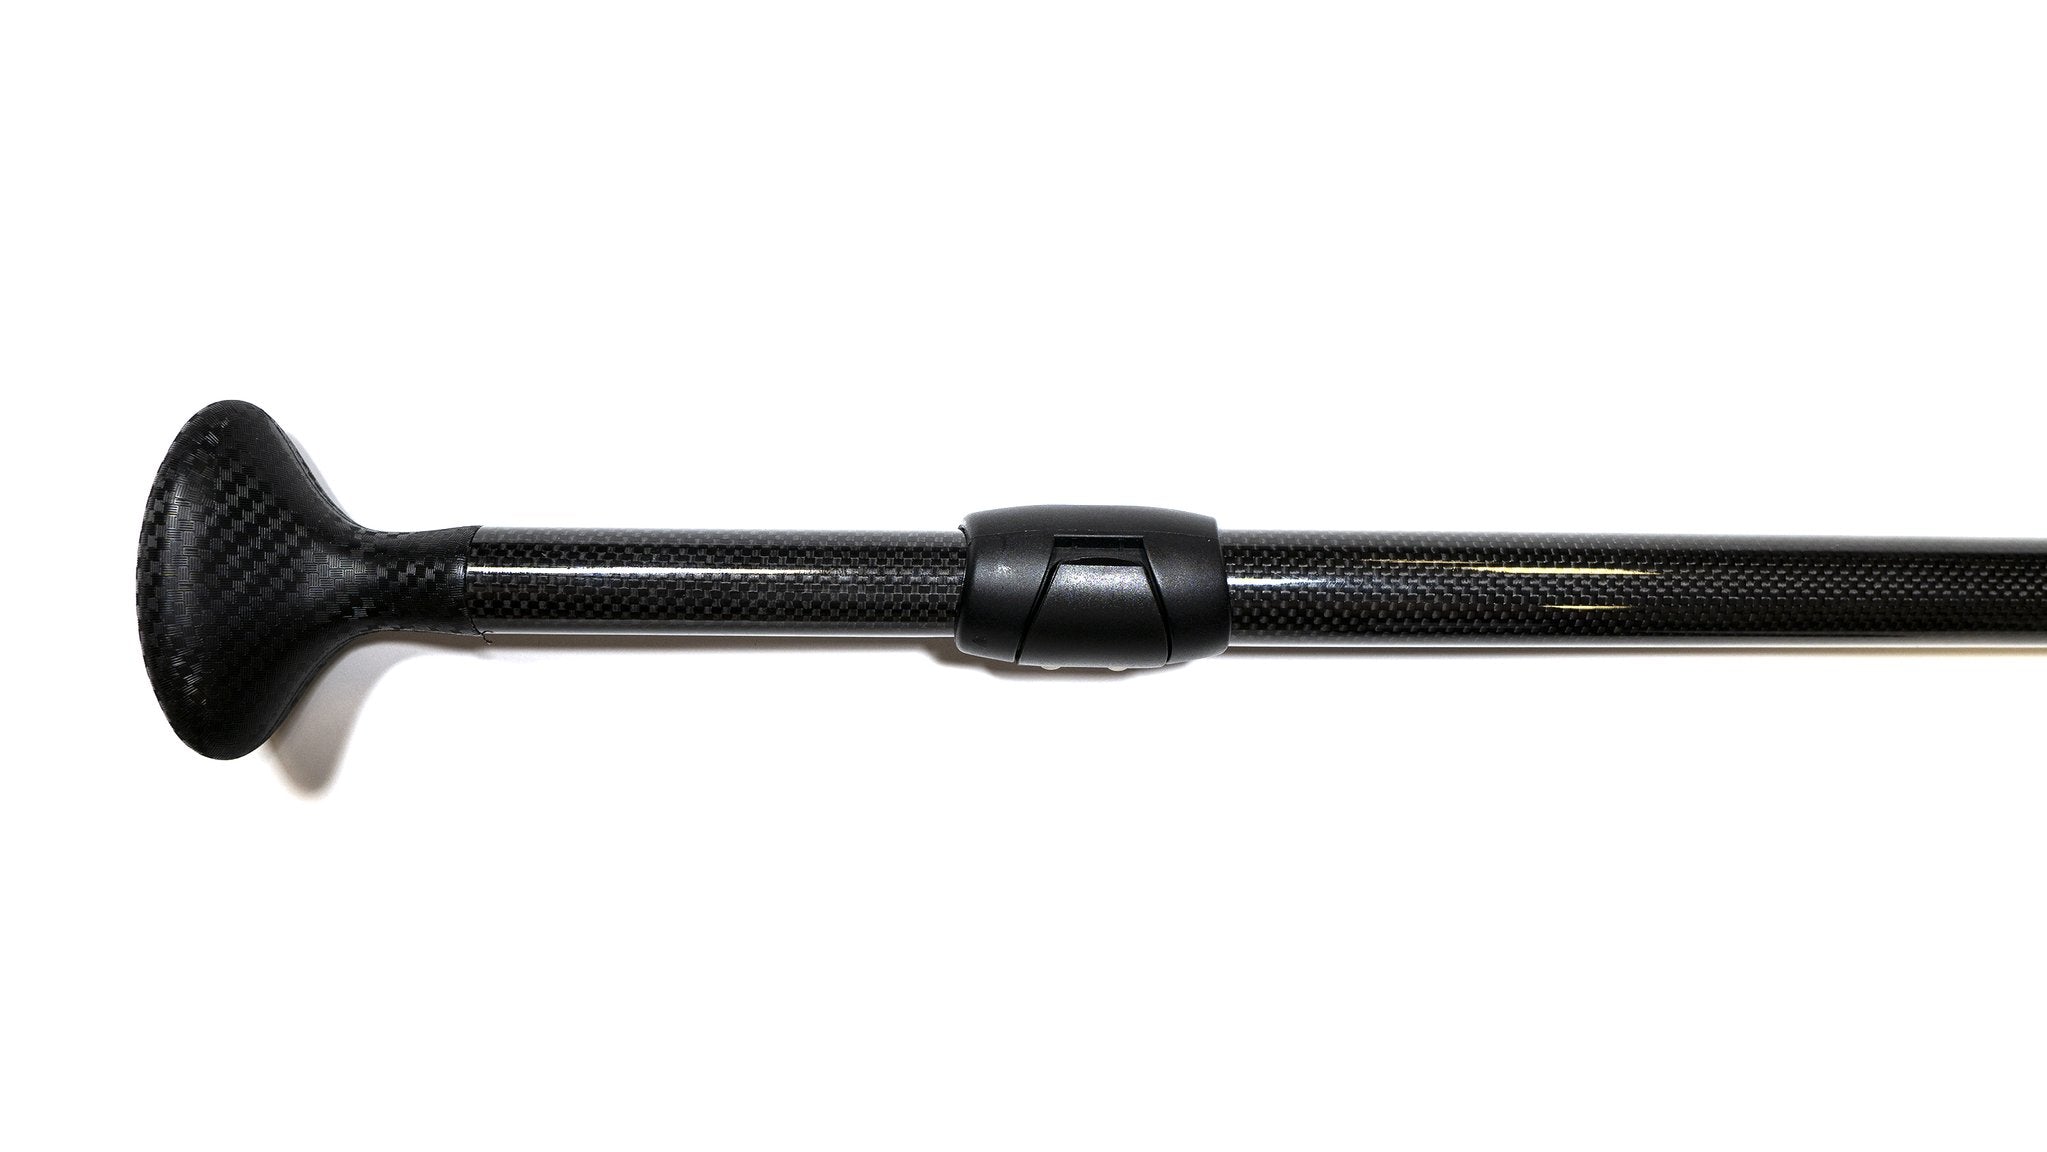 100% Carbon Fiber Composite Shaft reduces weight and adds stiffness Durable PP+Fiber Blades. (Blend of polypropylene and fiberglass). Double Paddle Adjusts between 112